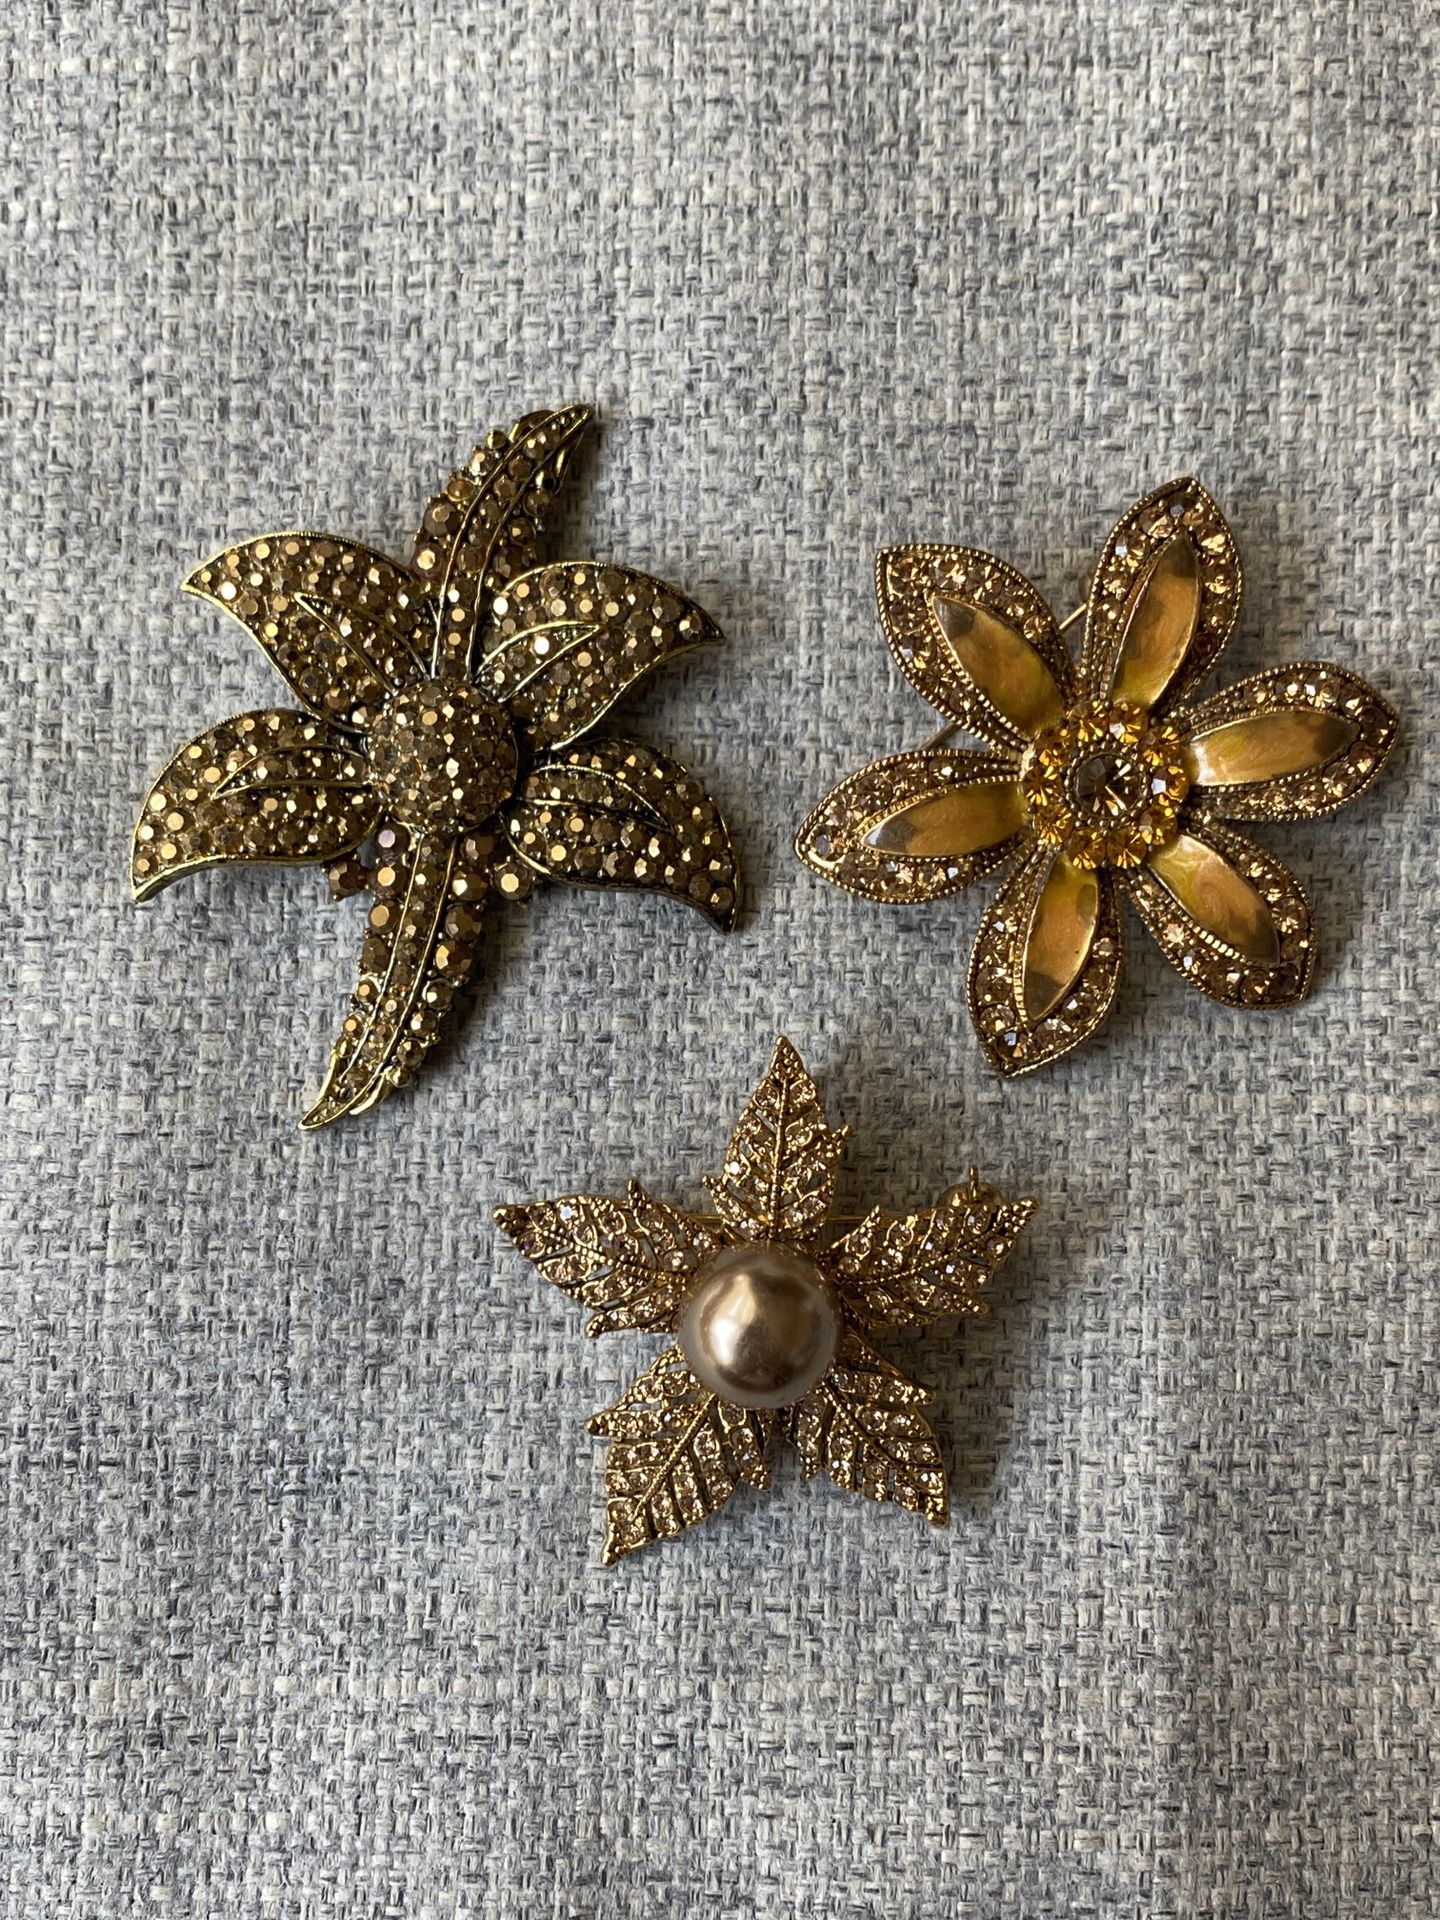 Lot of 3 Yellow Citrine Rhinestone Floral Flower Brooches - 1 Signed Hollycraft